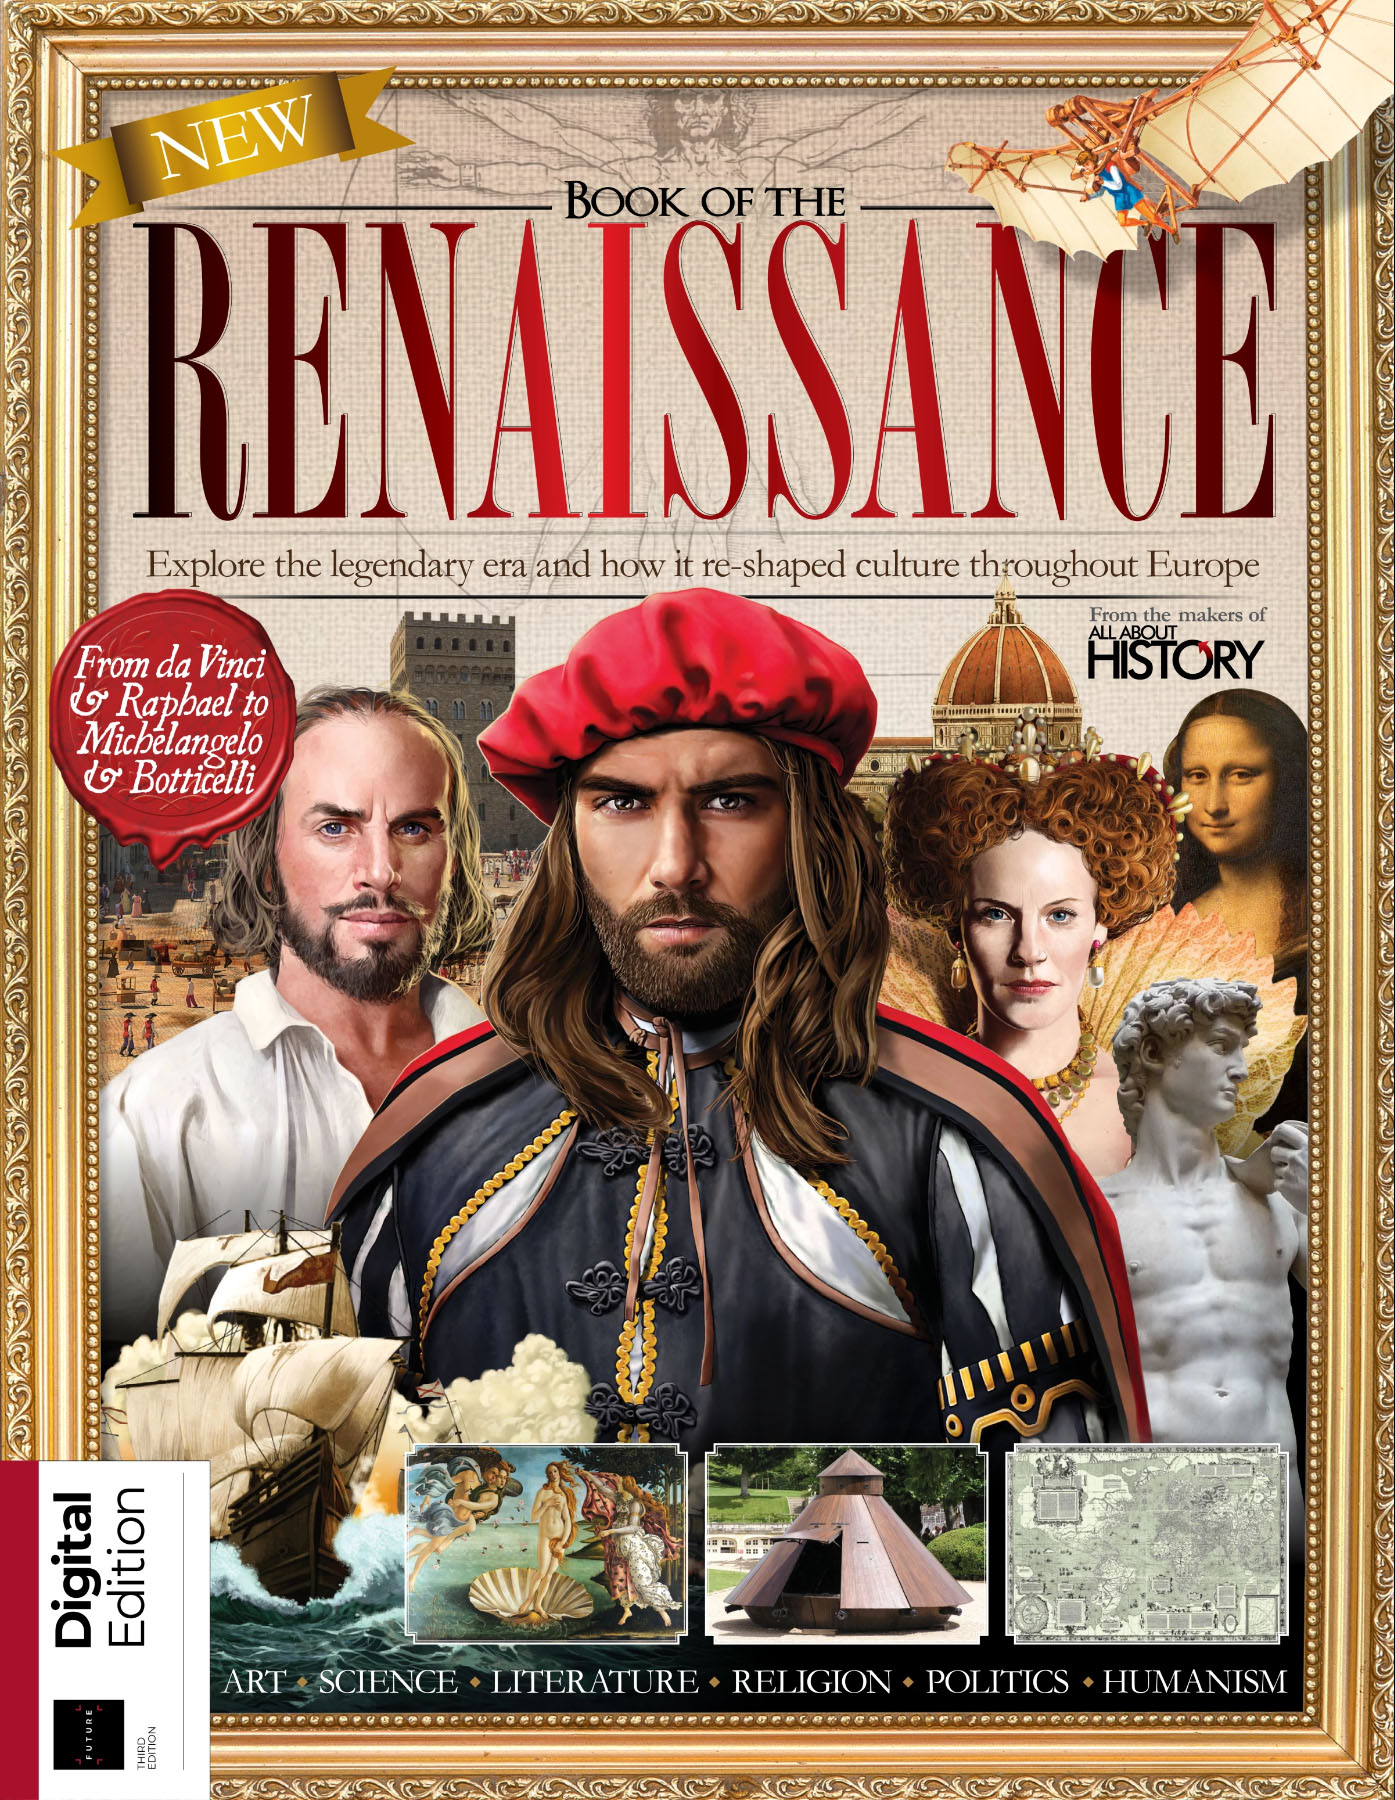 All_About_History_-_Book_of_the_Renaissance_-_2019.jpg